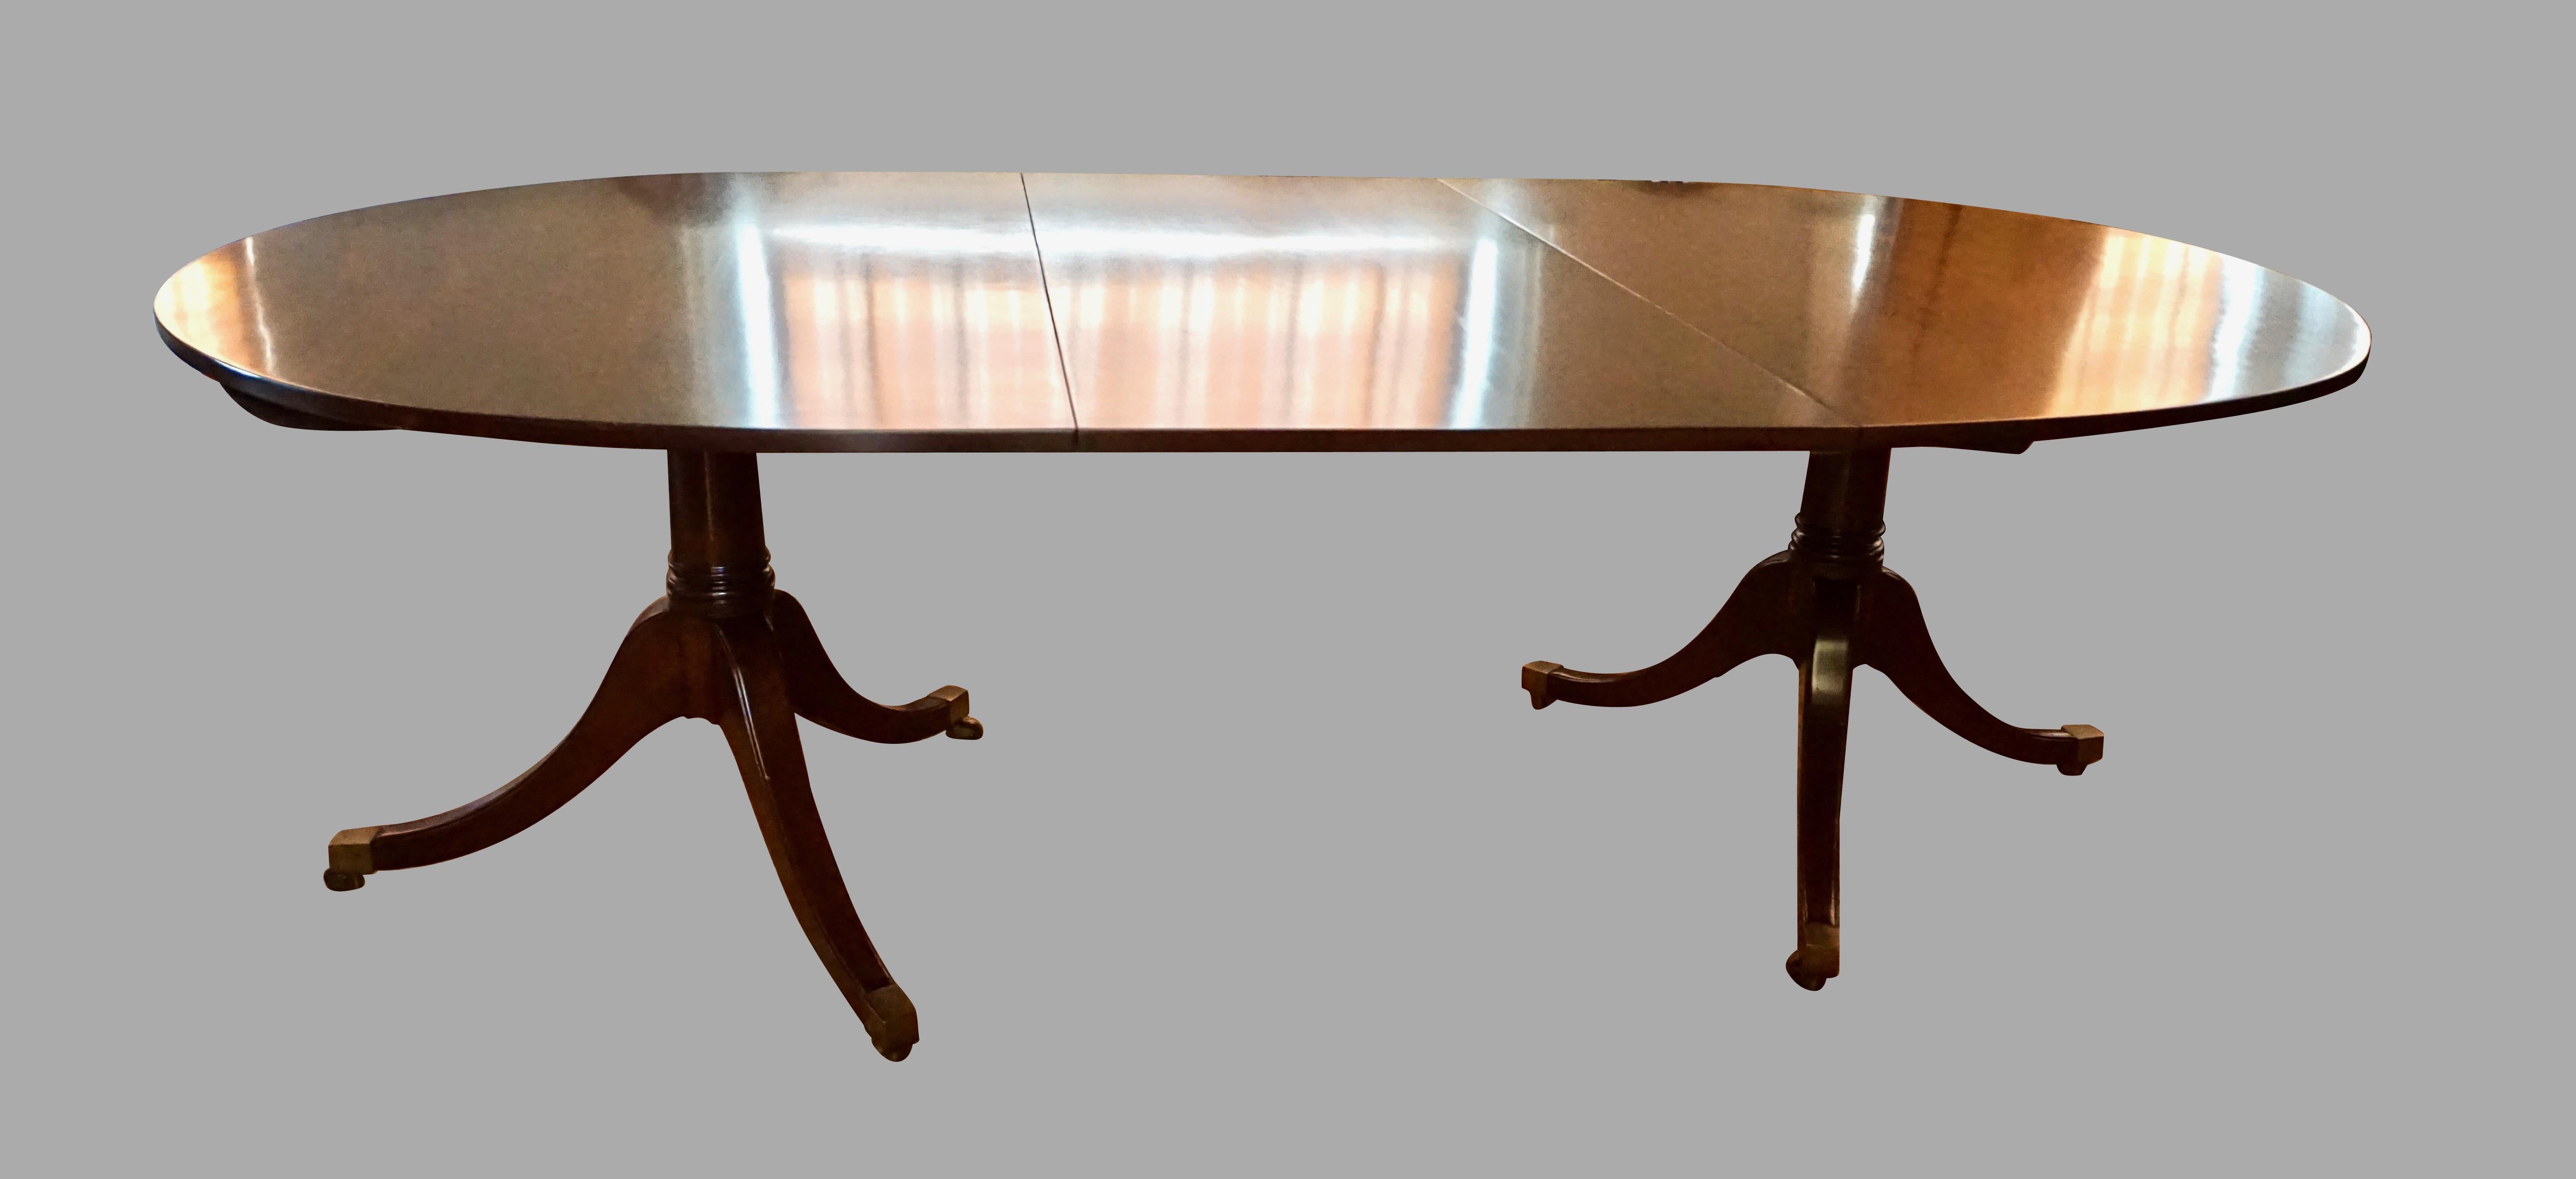 19th Century English 3 Pedestal Georgian Style Dining Table with 2 Original Leaves